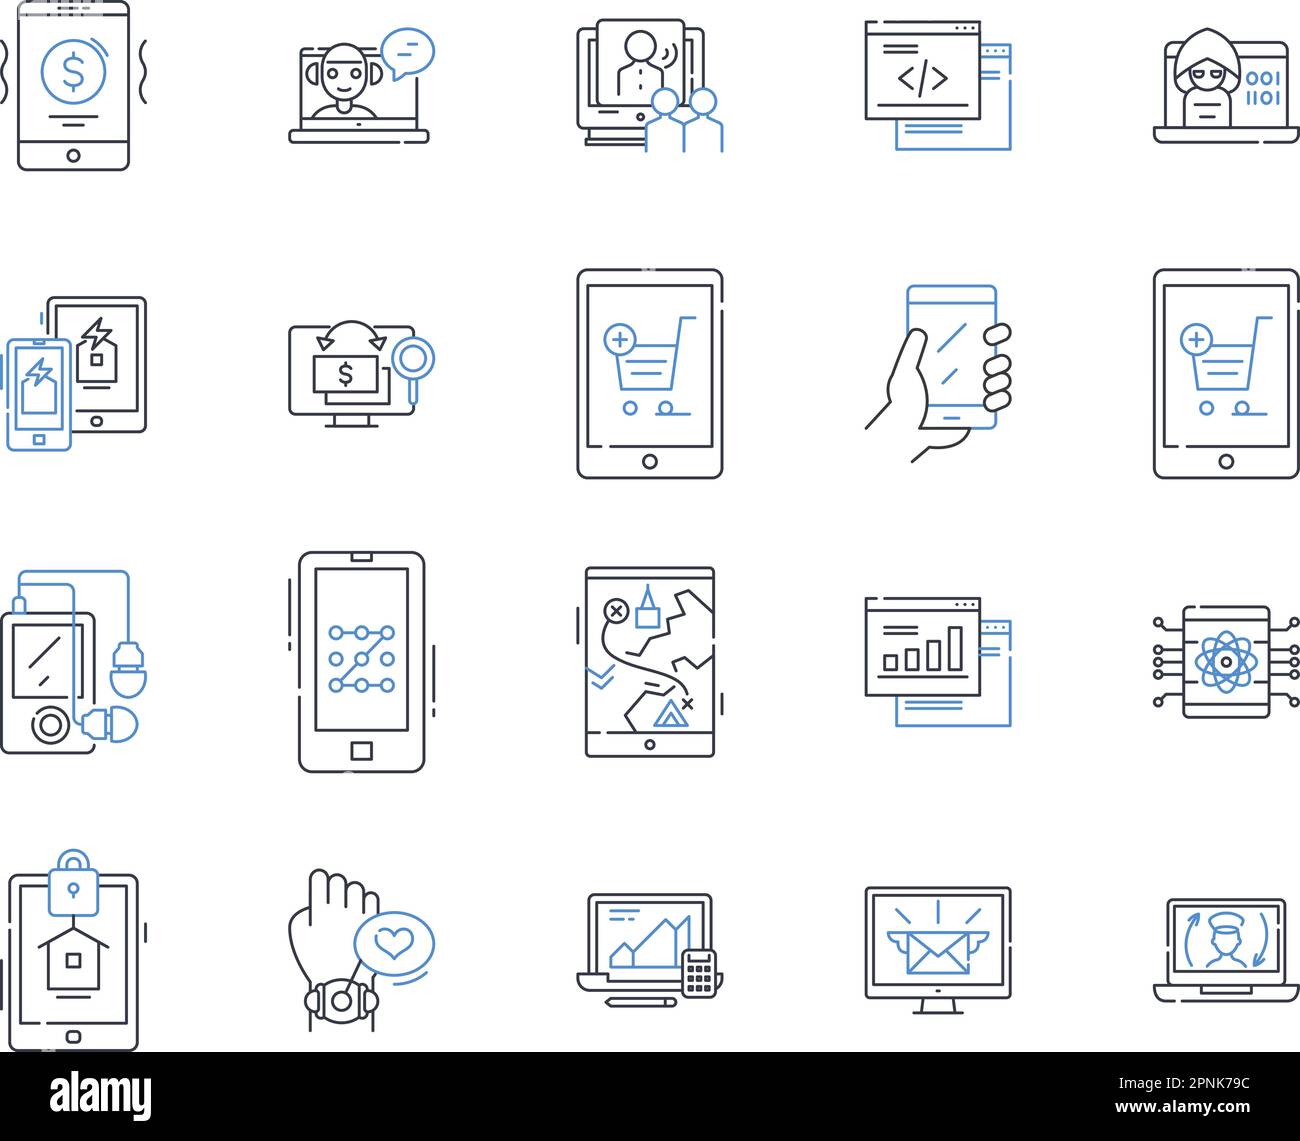 Apparatus line icons collection. Equipment, Tools, Devices, Appliance, Mechanism, Machinery, Instrument vector and linear illustration. Fixture,Gear Stock Vector